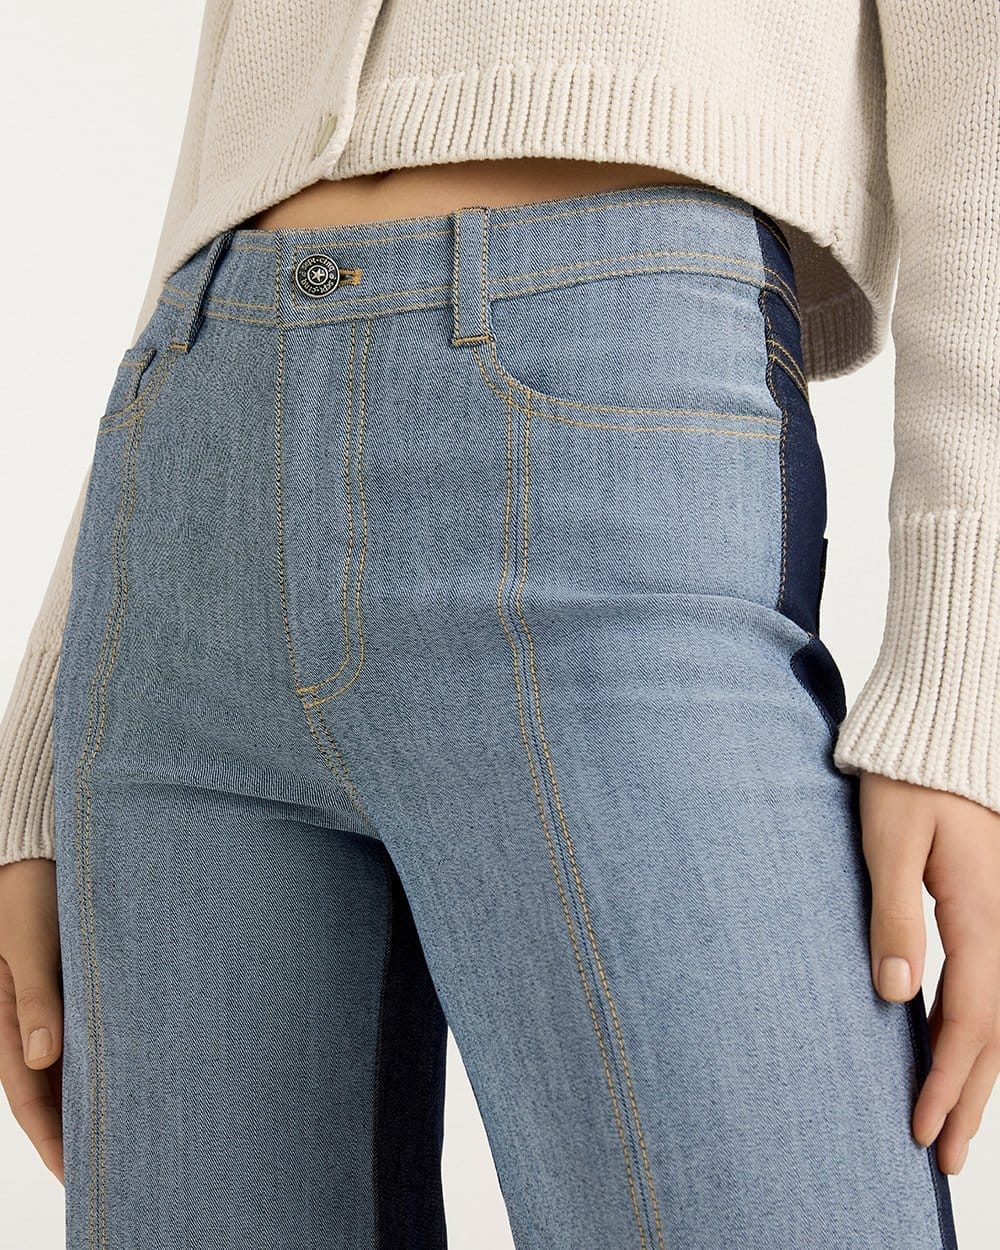 https://cinqasept.nyc/collections/le-denim